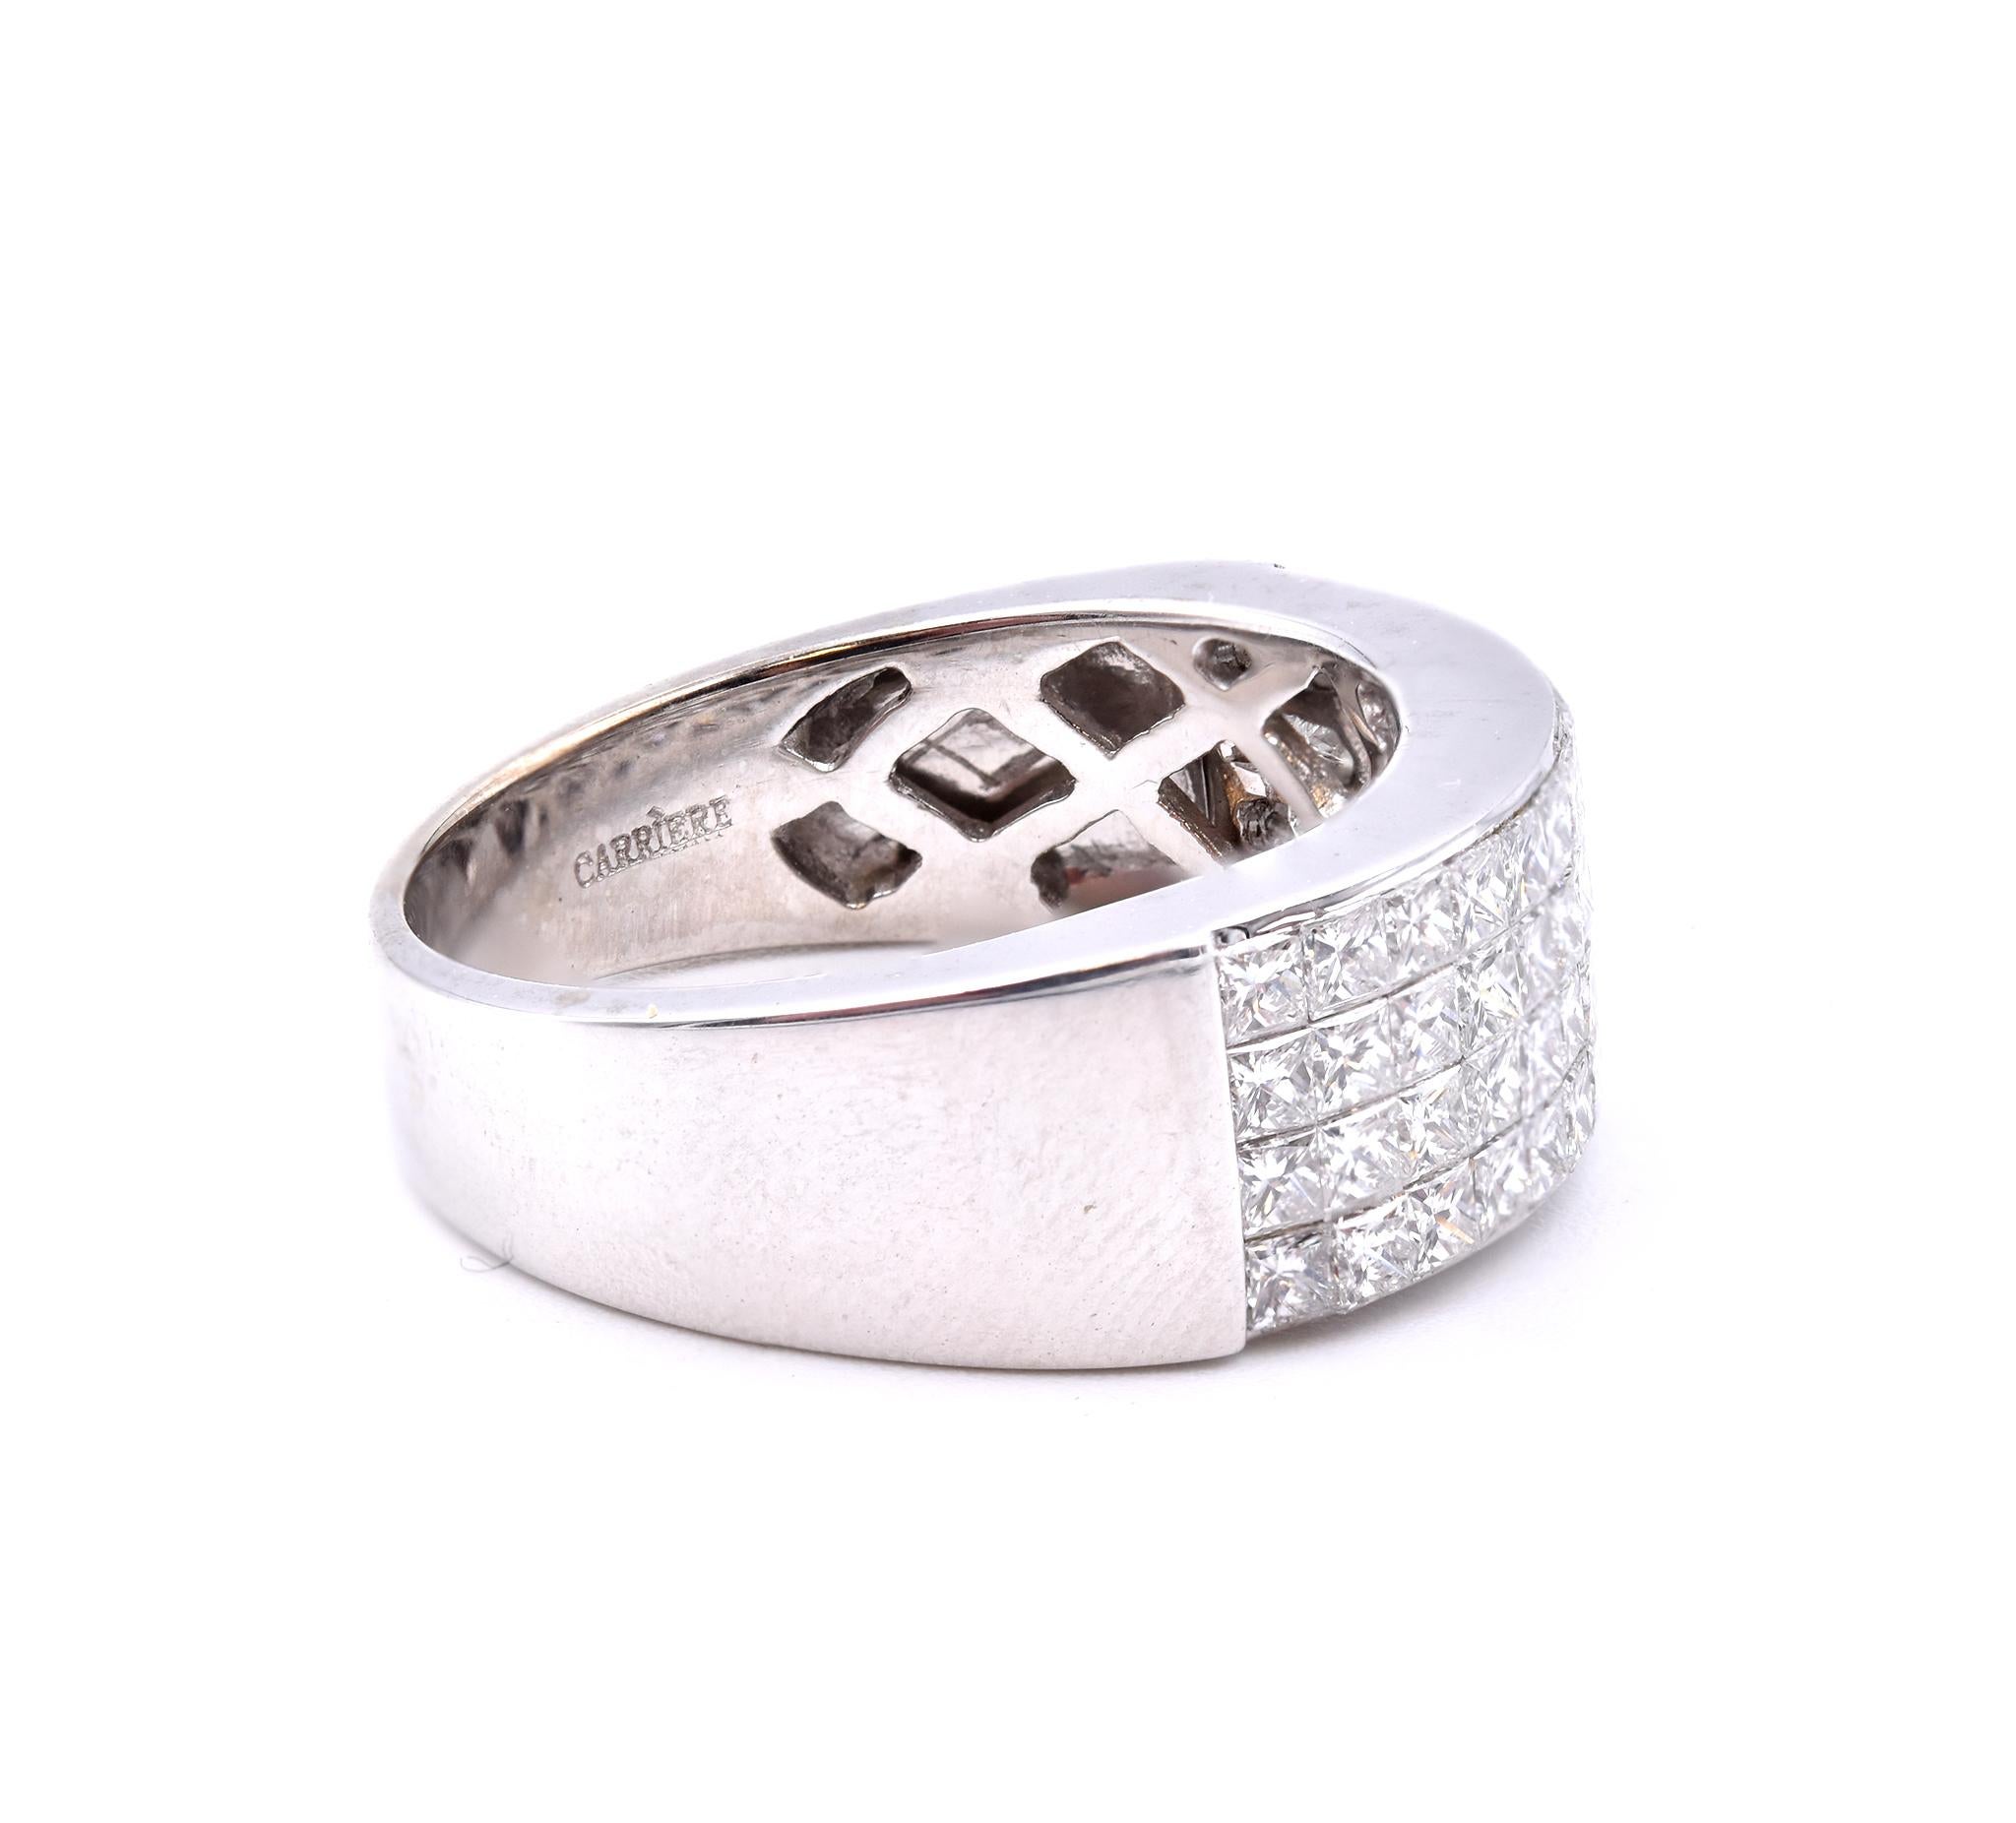 Designer: Carriere
Material: 18K white gold
Diamonds: 56 invisible cut princess cuts = 3.36cttw
Color: G
Clarity: VS2
Ring Size: 7 (please allow up to 2 additional business days for sizing requests)
Dimensions: ring top measures 7.8mm wide
Weight: